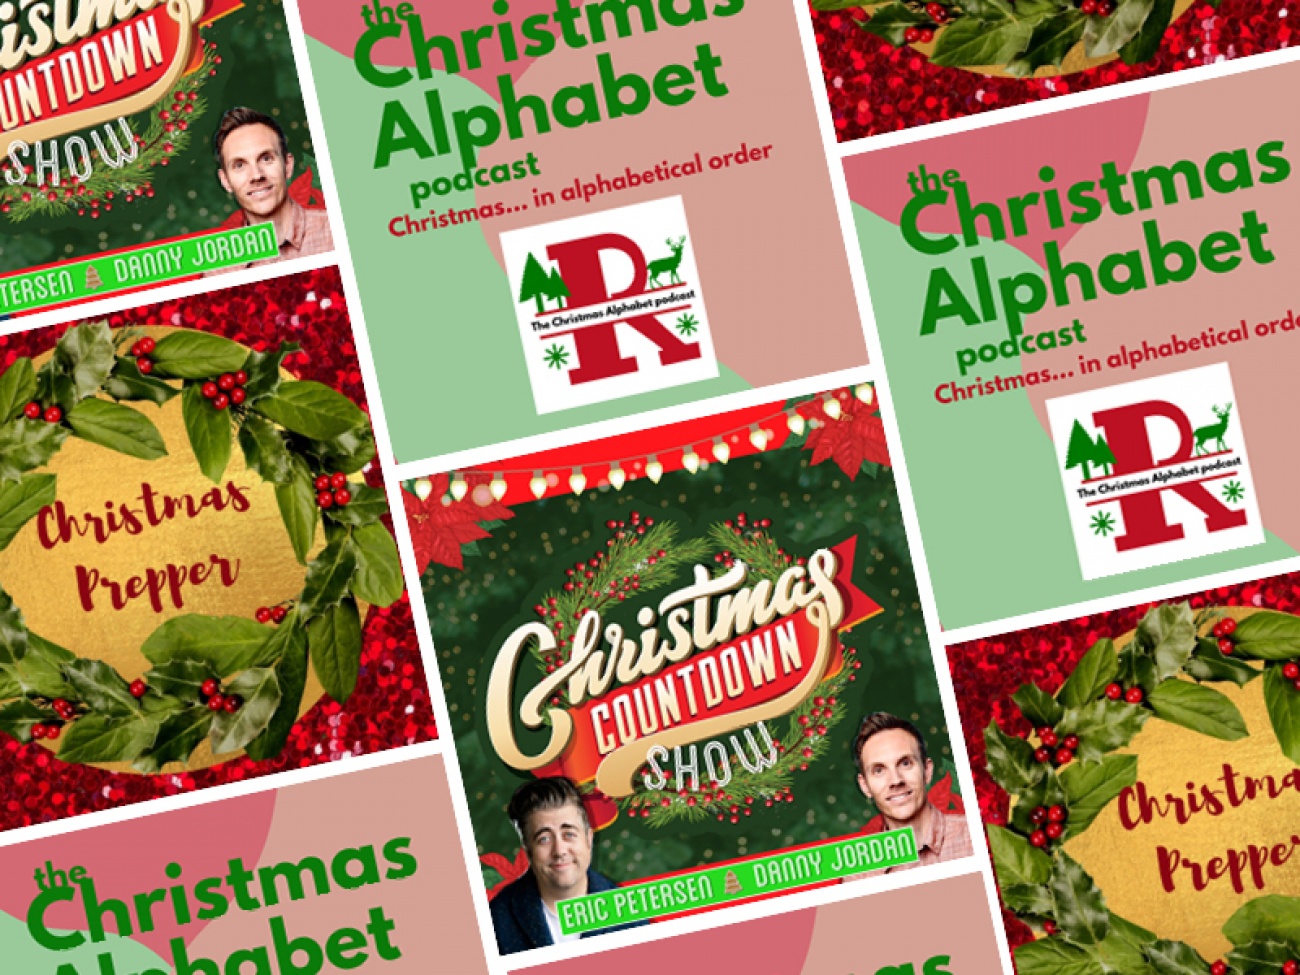 three-fabulously-festive-podcasts-to-get-you-in-the-christmas-spirit